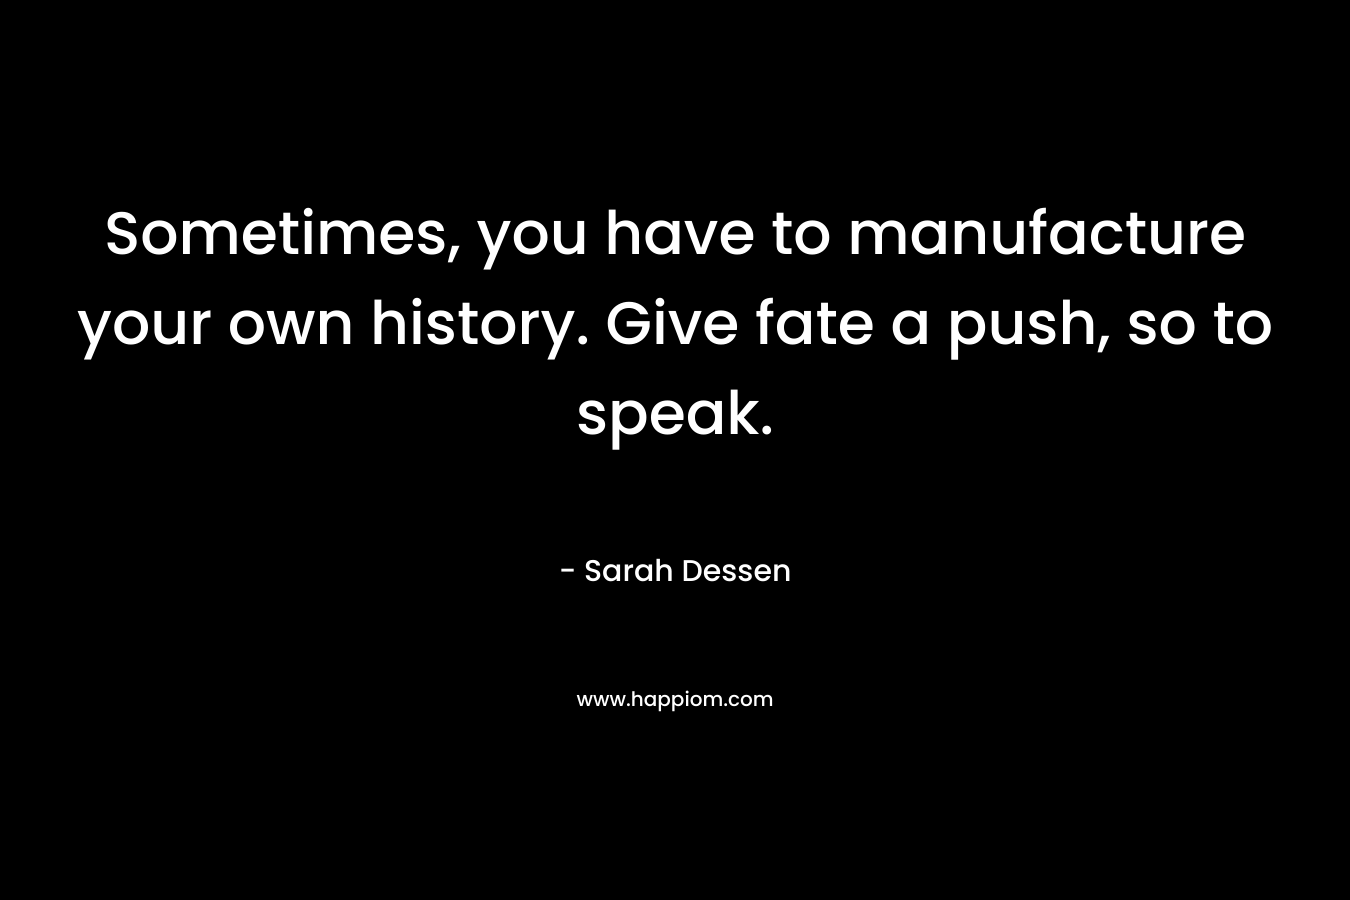 Sometimes, you have to manufacture your own history. Give fate a push, so to speak.